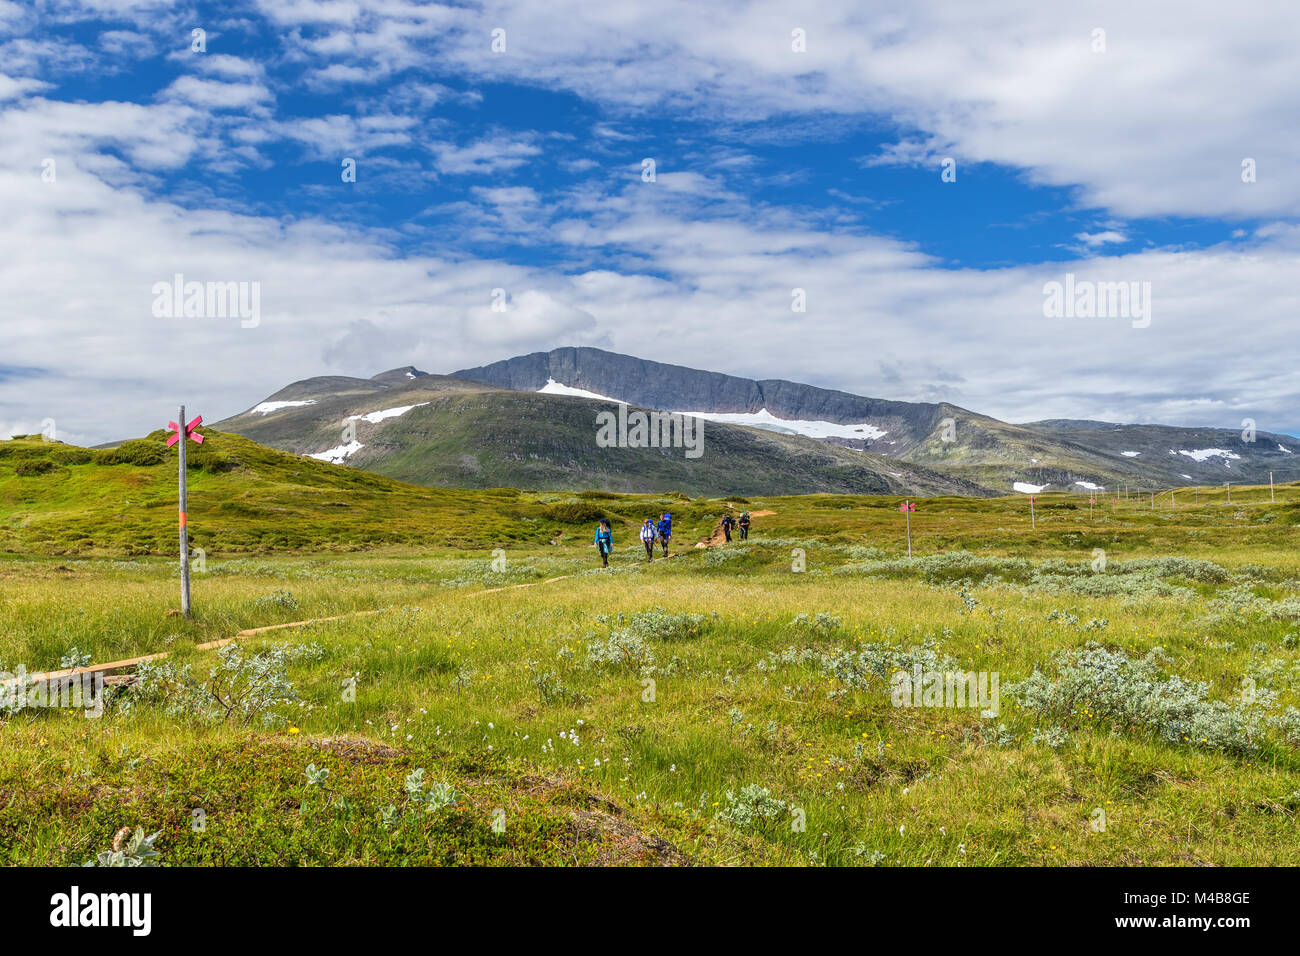 Mountain hikers in the Swedish mountains Stock Photo